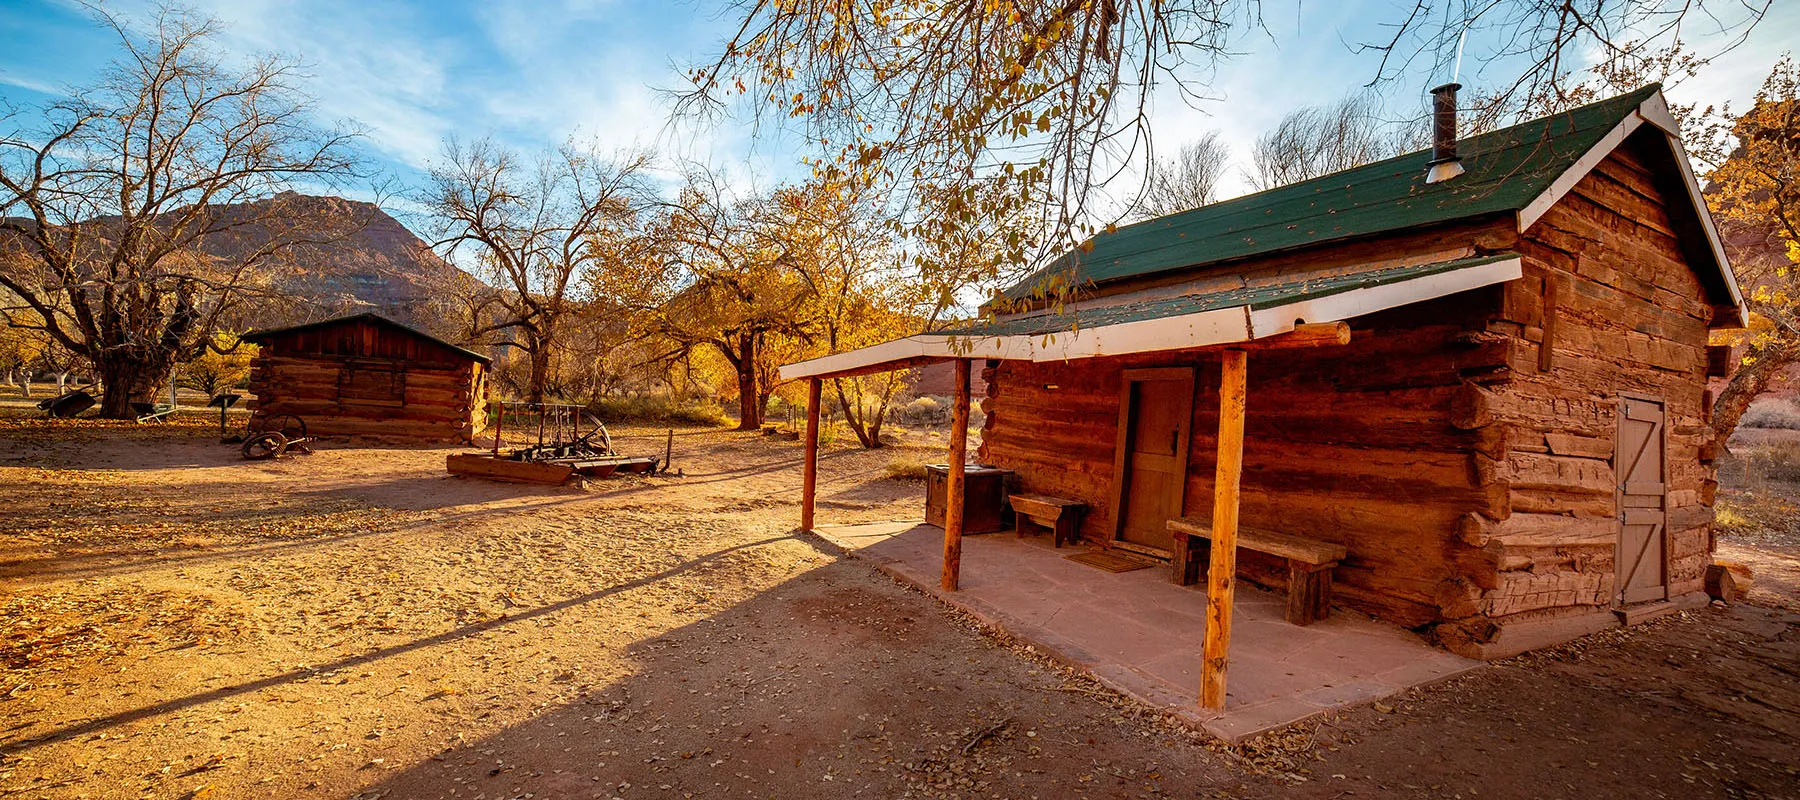 Restored cabins at the Lonely Dell Ranch